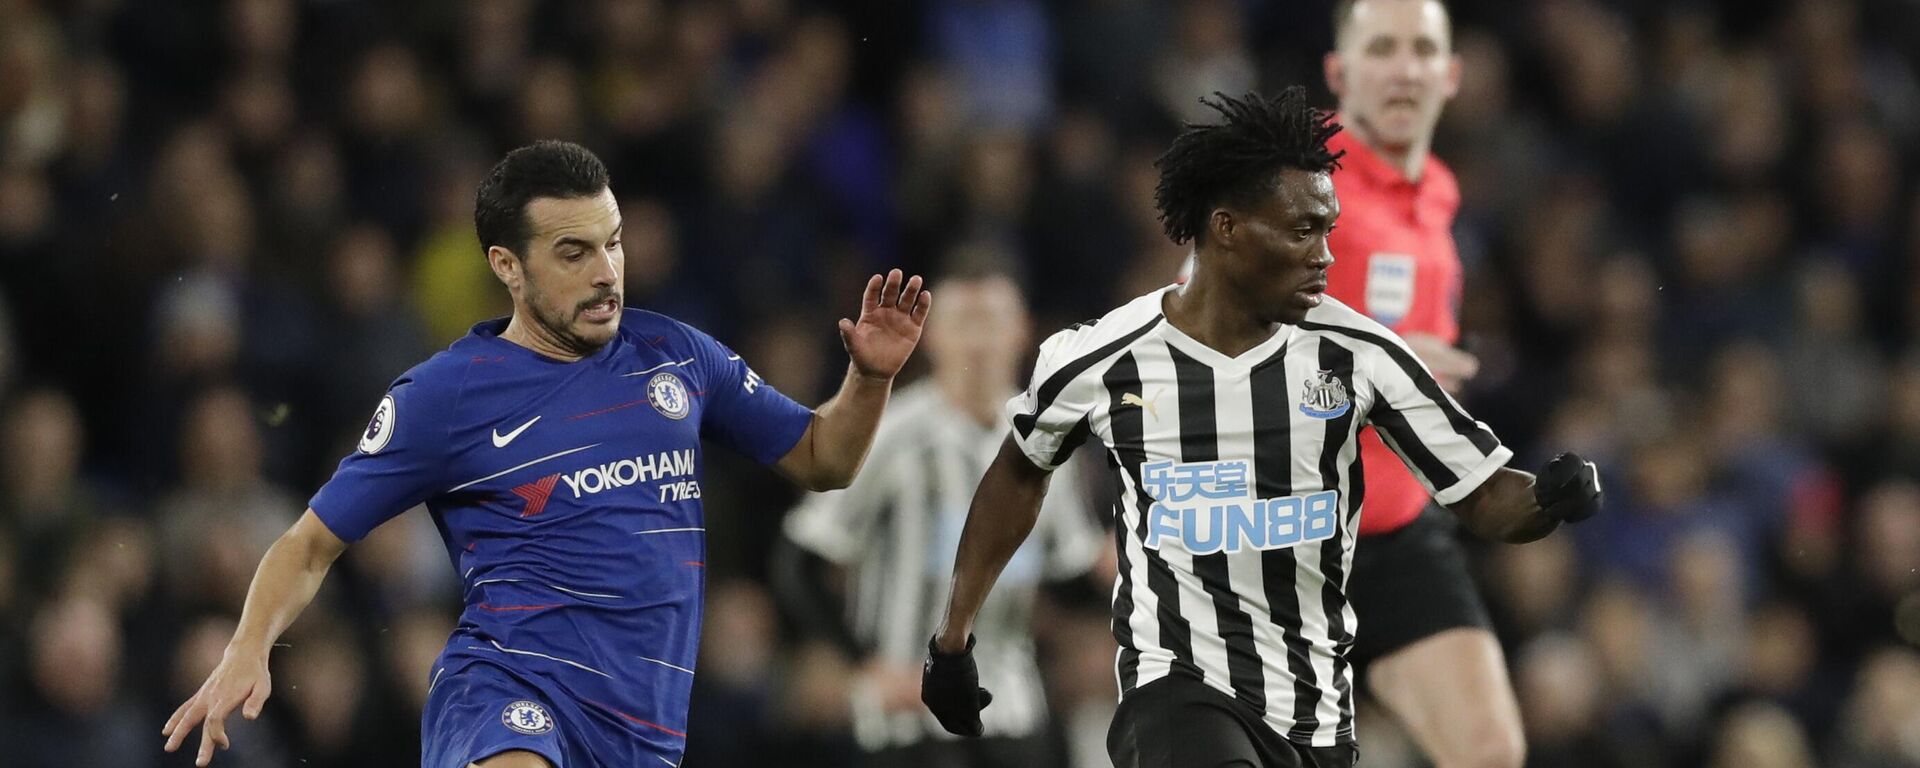 Former Chelsea and Newcastle forward Christian Atsu is missing and believed to be trapped under rubble following the powerful earthquake that struck Turkey on Monday - Sputnik International, 1920, 09.02.2023